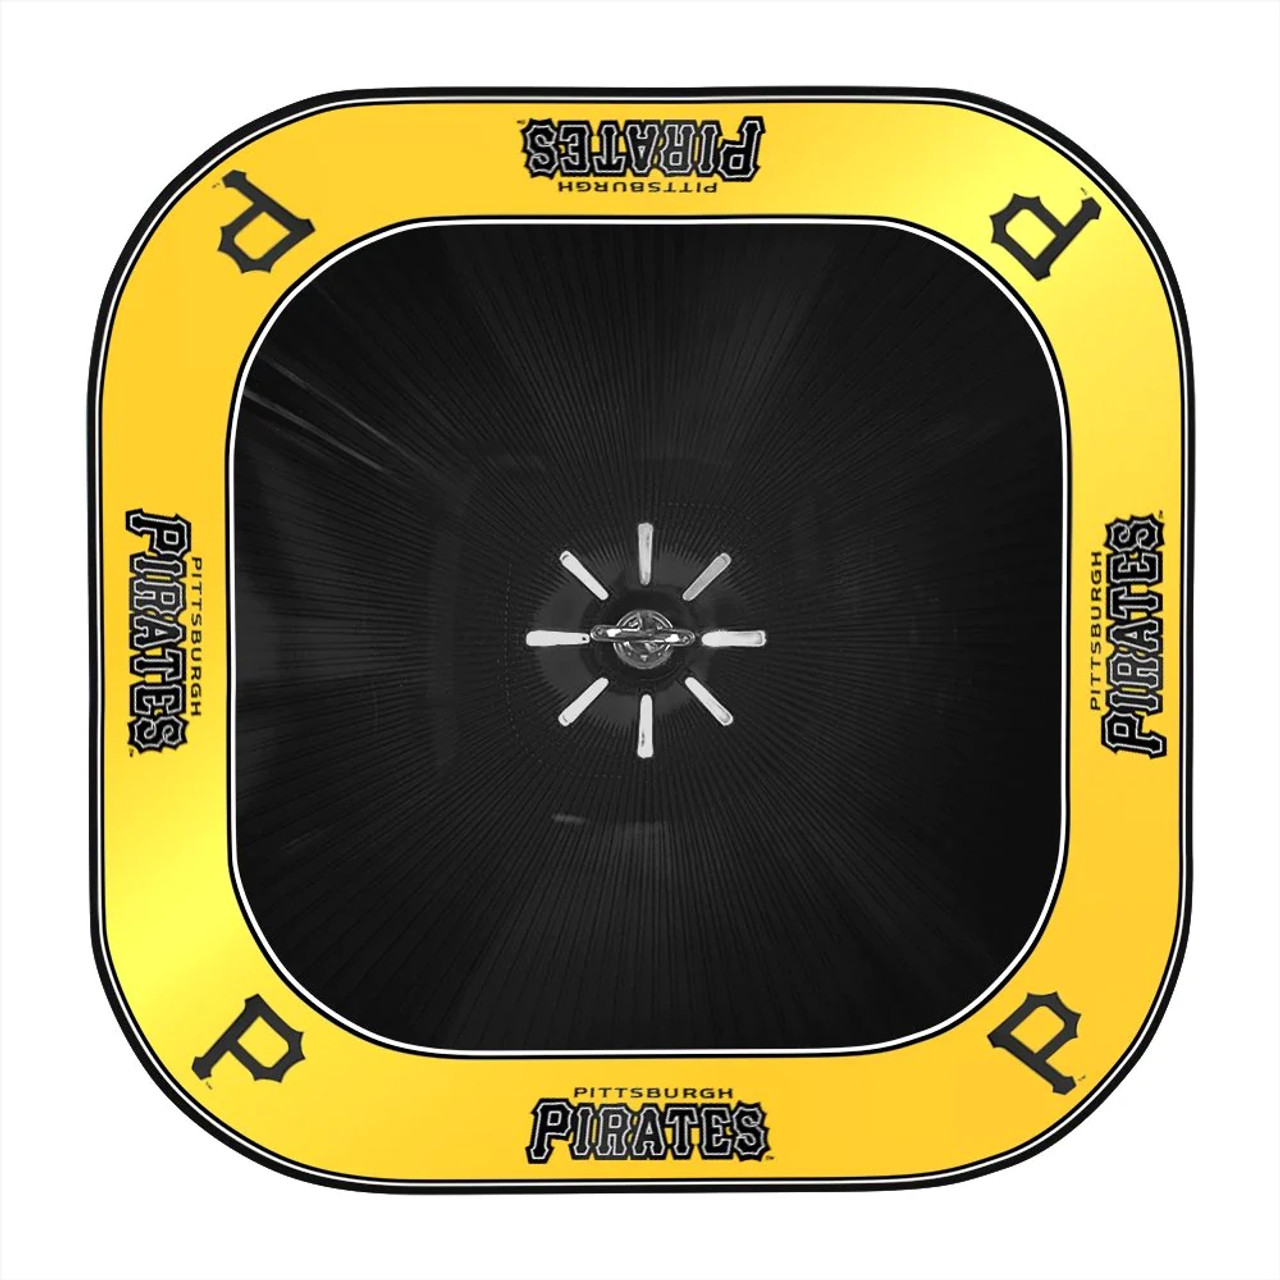 Pittsburgh Pirates: Game Table Light